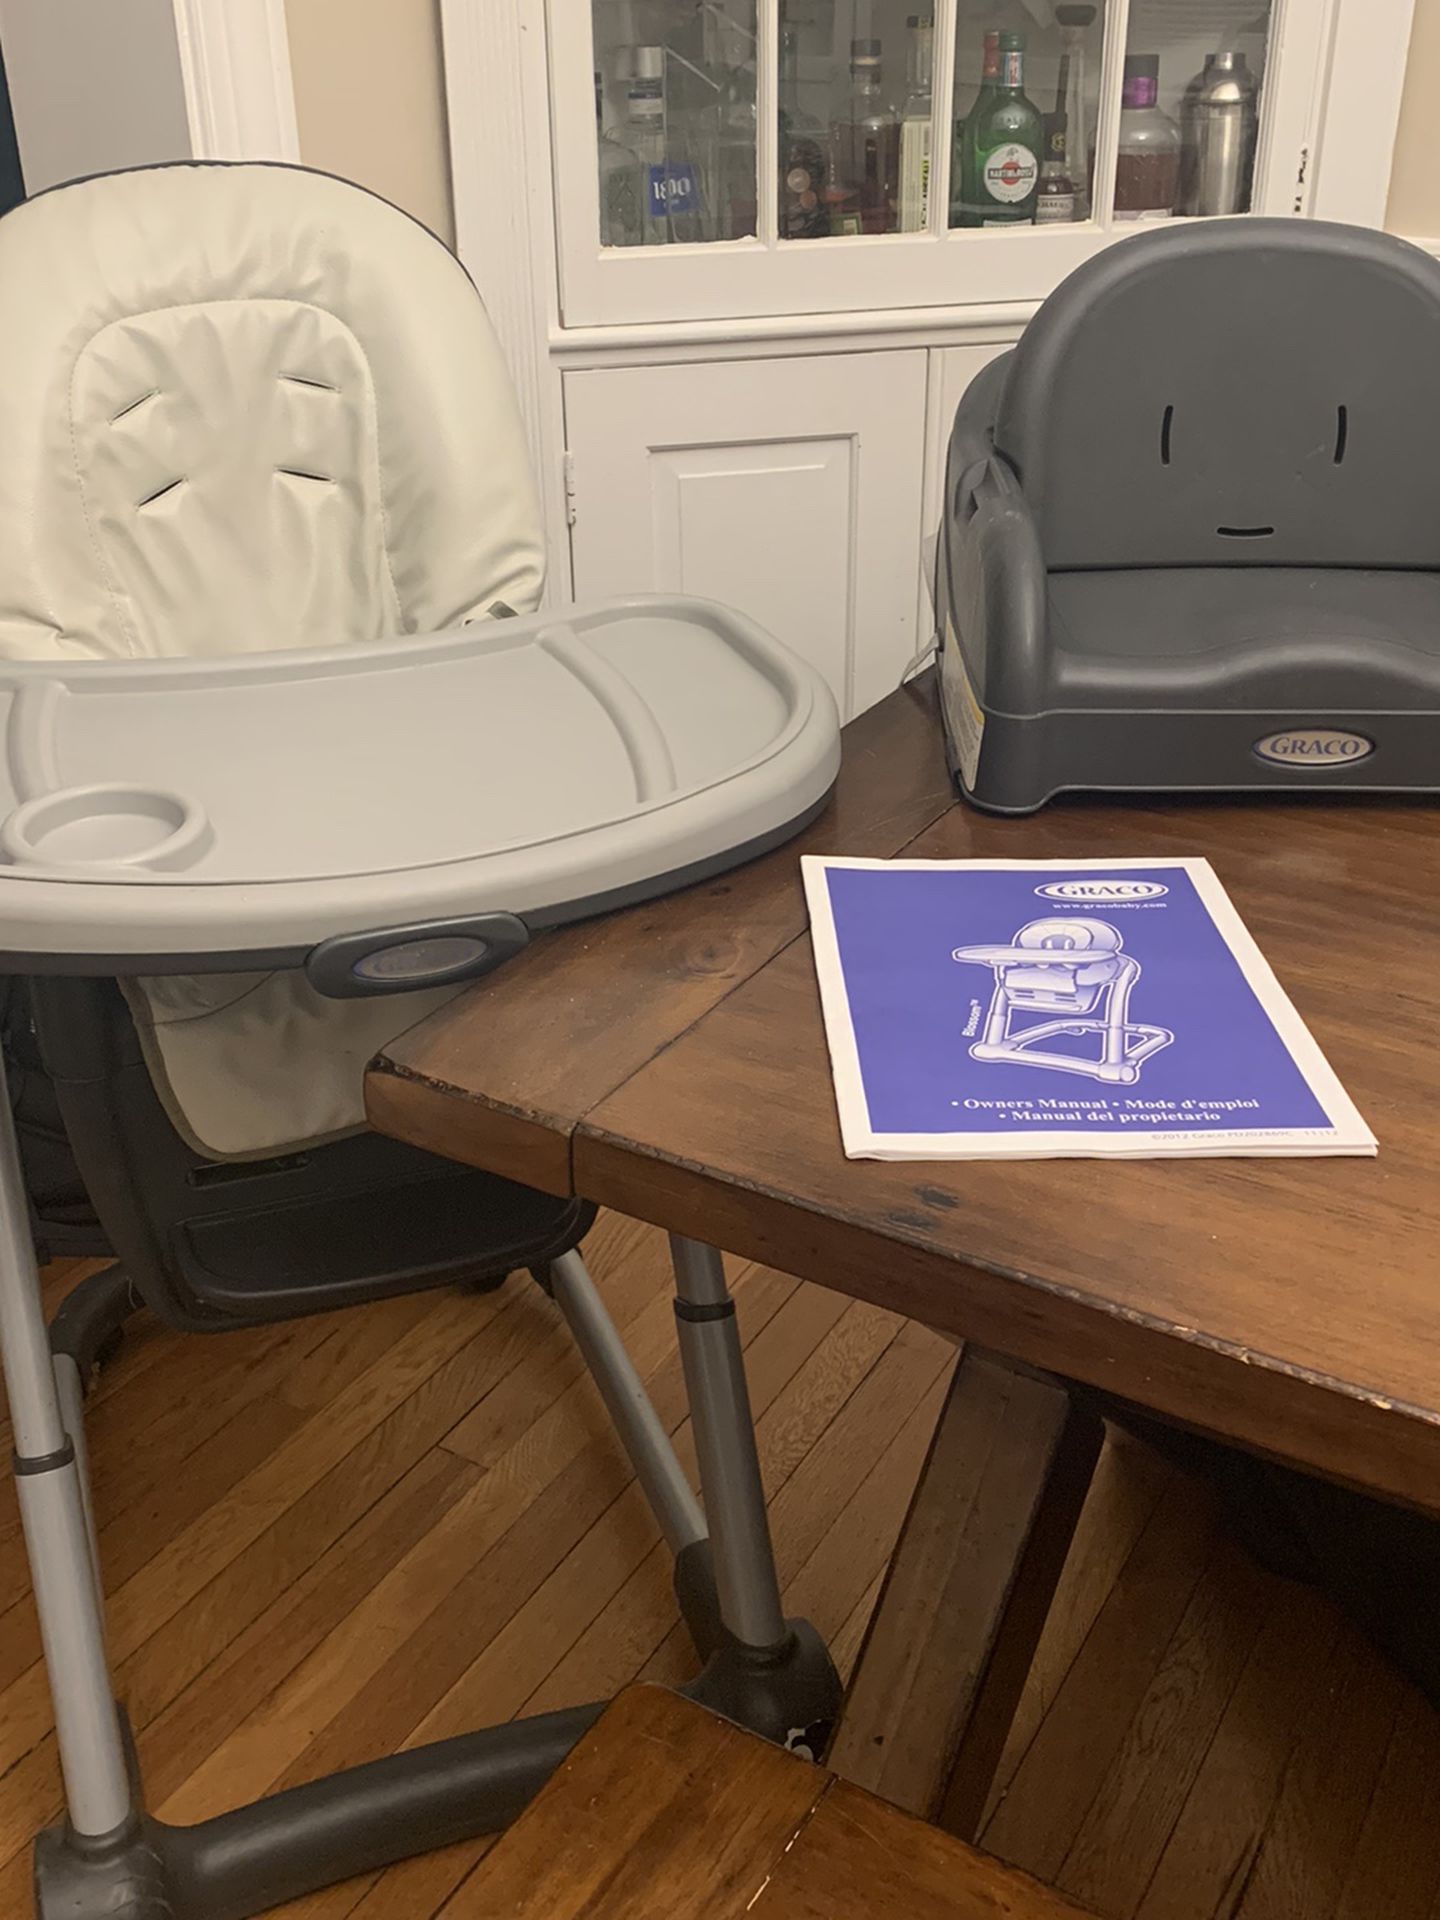 Graco Blossom 6 In 1 High chair